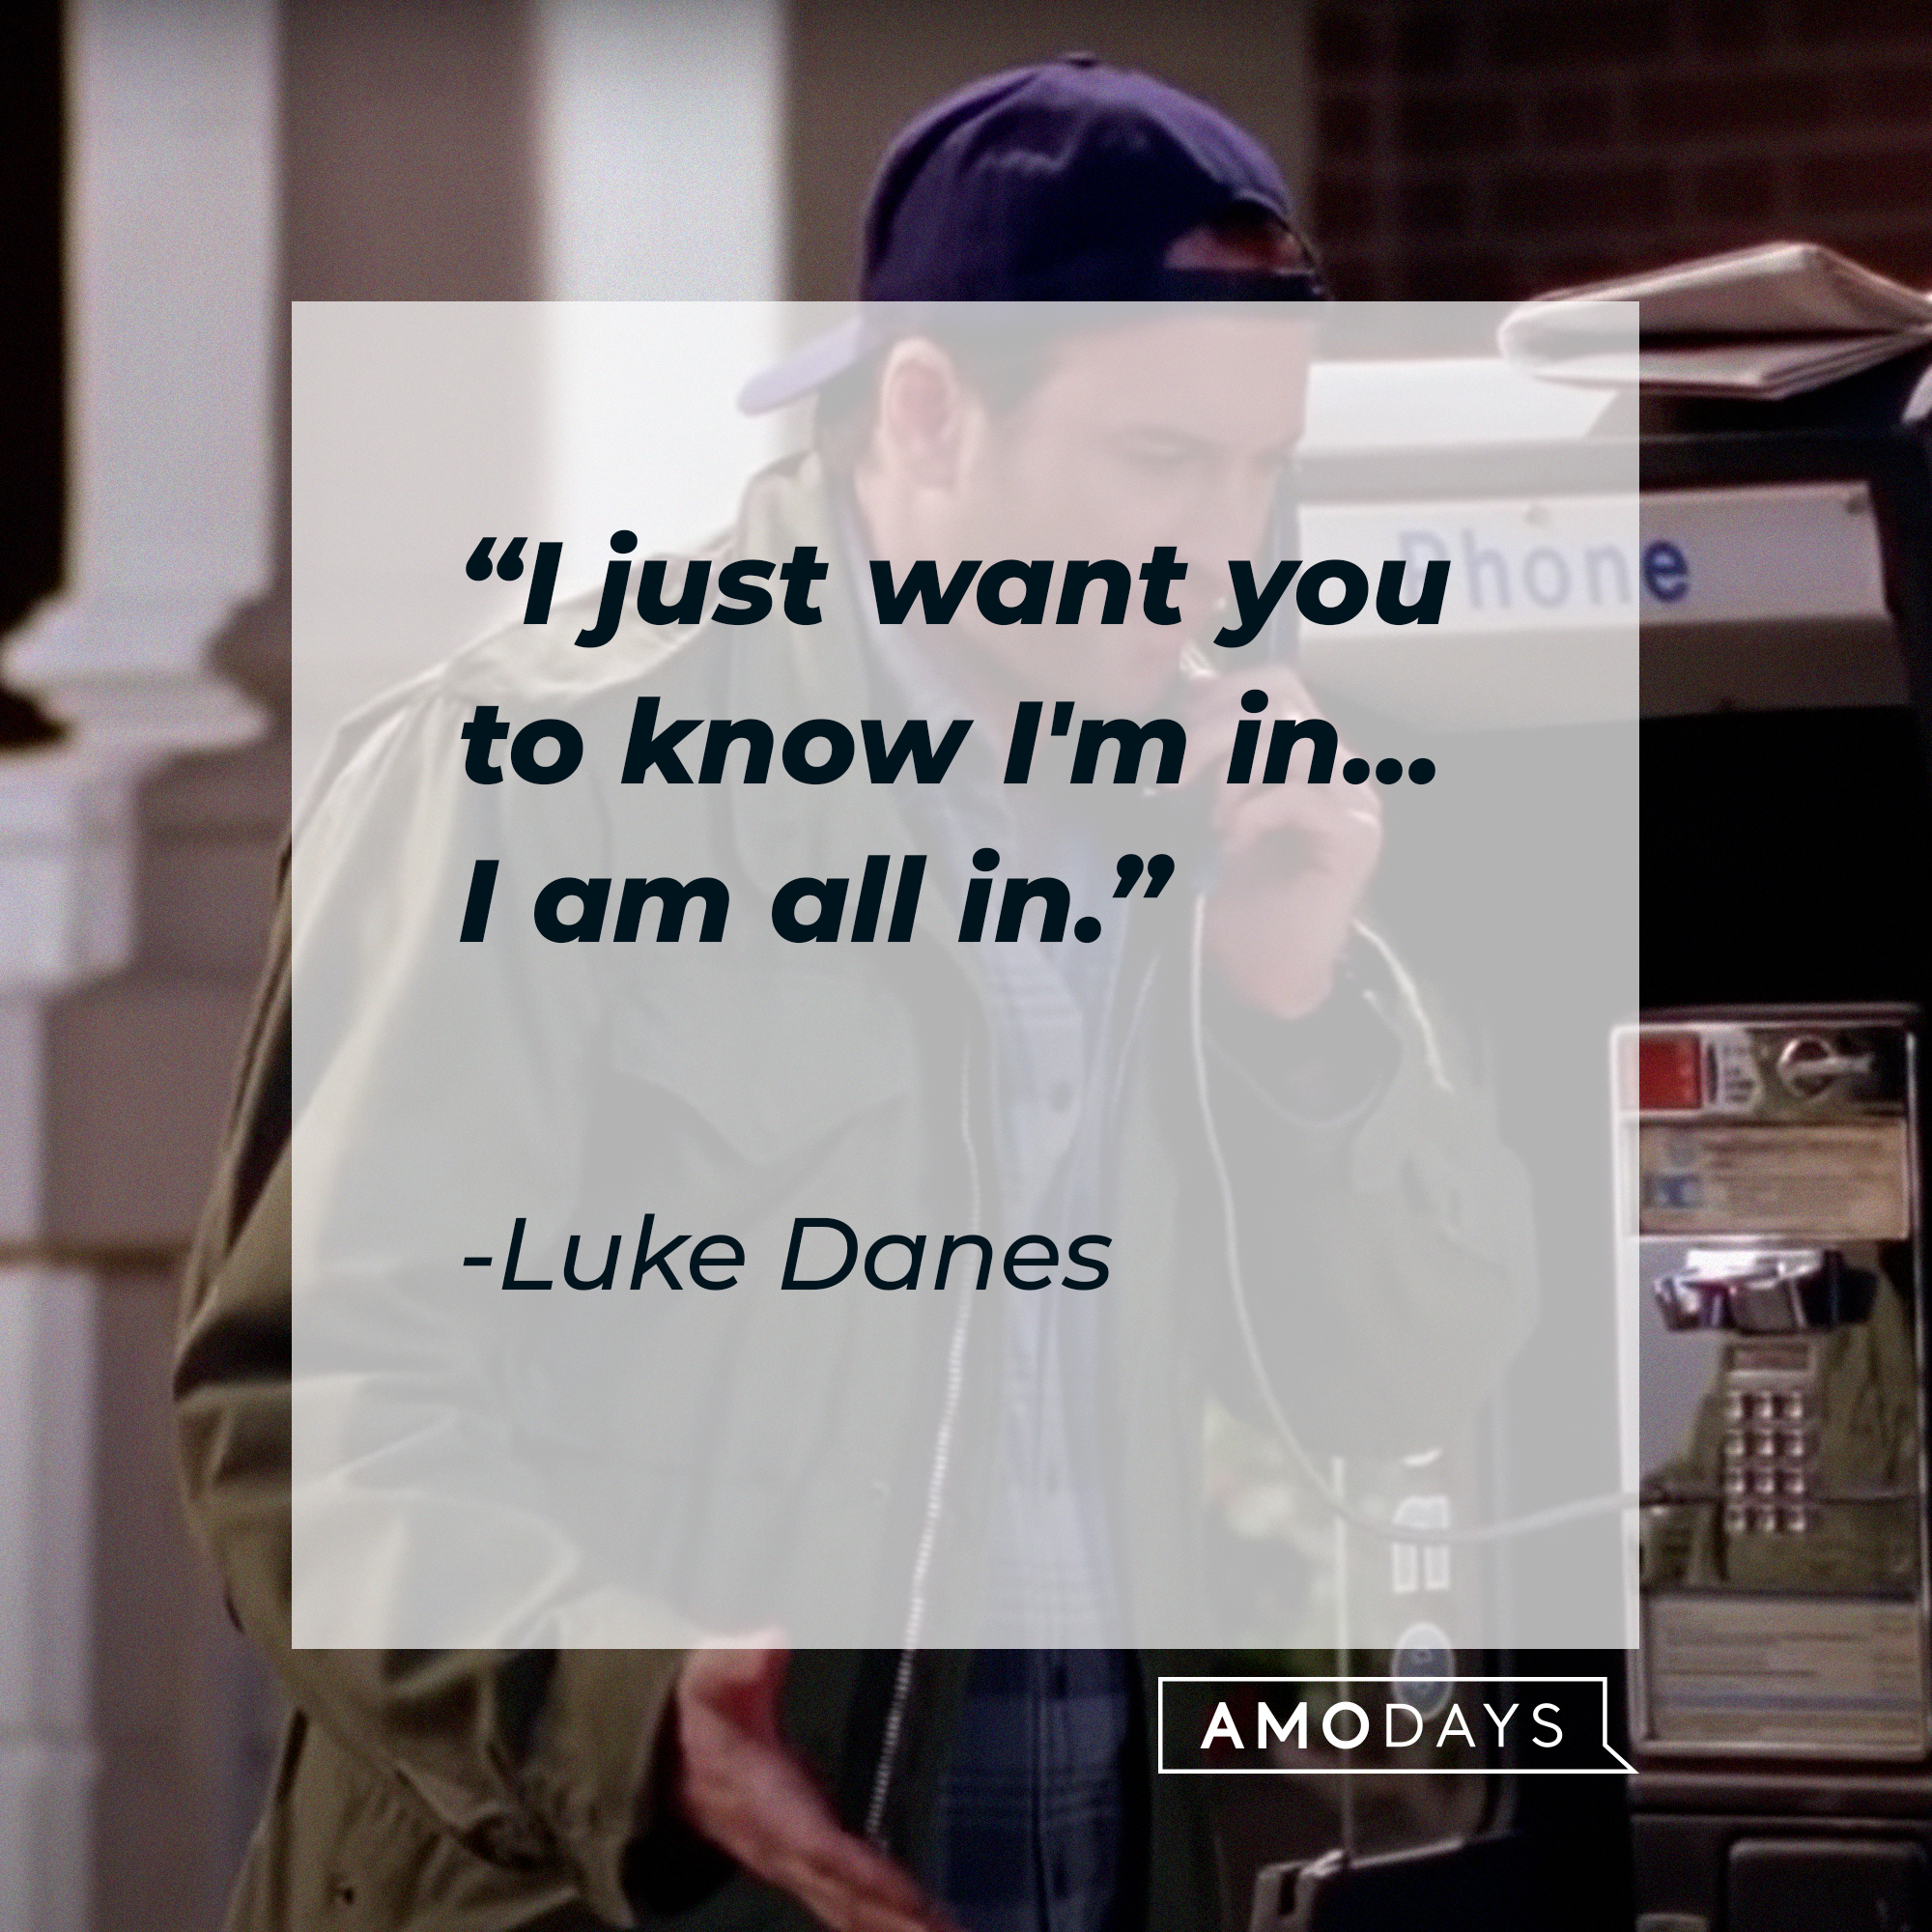 Luke Danes, with his quote: "I just want you to know I'm in...I am all in." | Source: facebook.com/GilmoreGirls